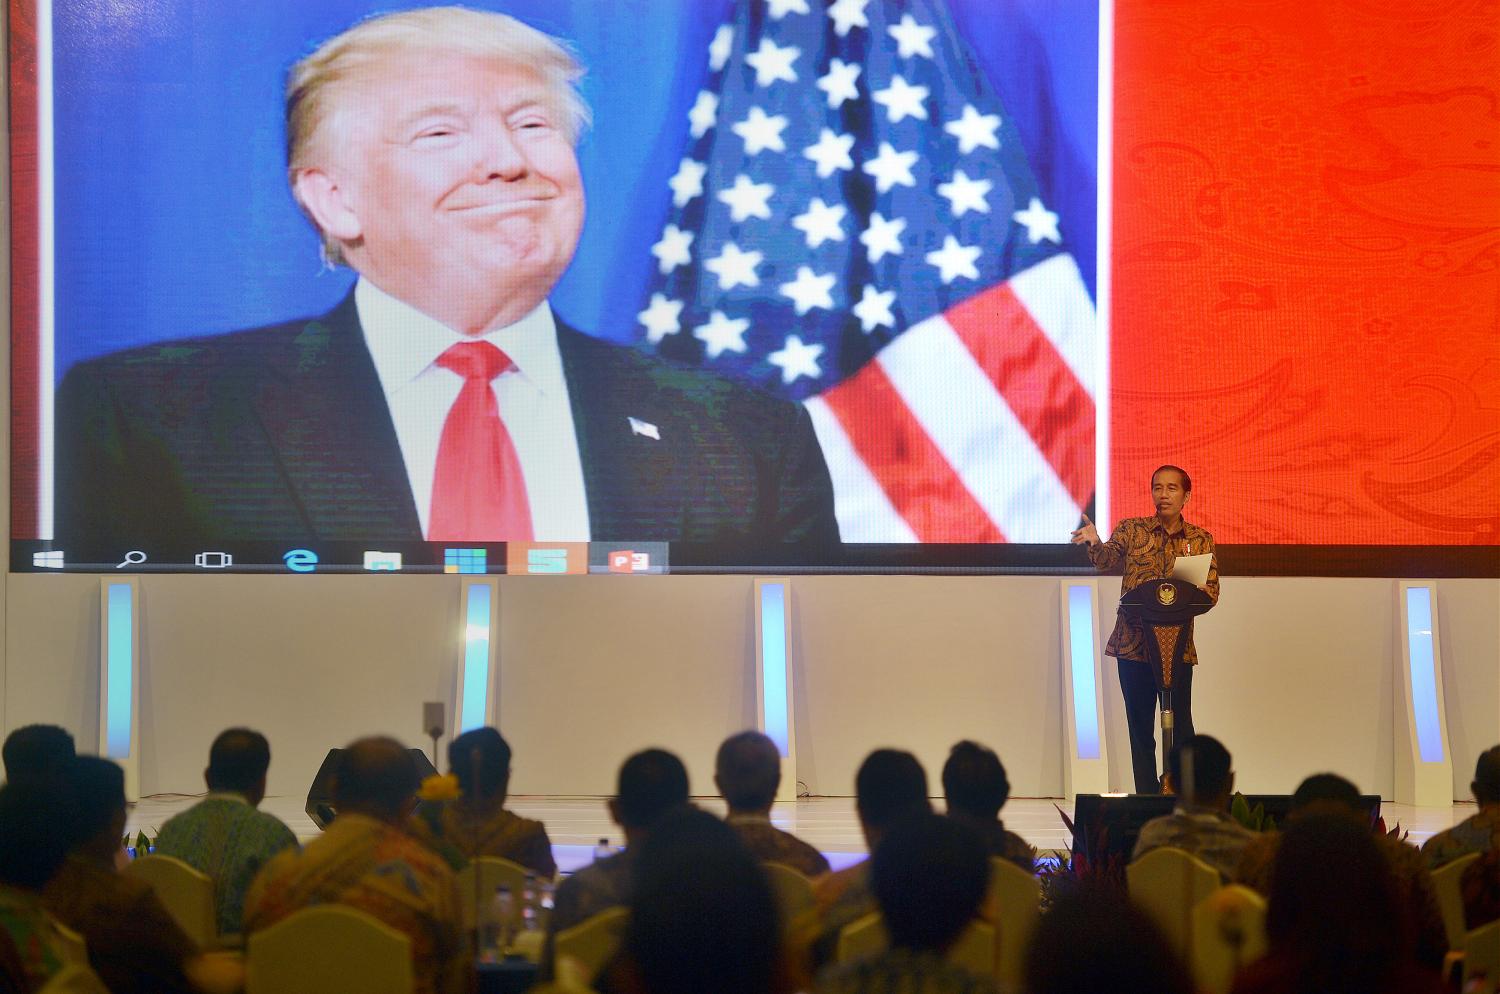 Indonesian President Joko Widodo speaks to local company executives as a picture of U.S. President-elect Donald Trump is shown on a screen behind him